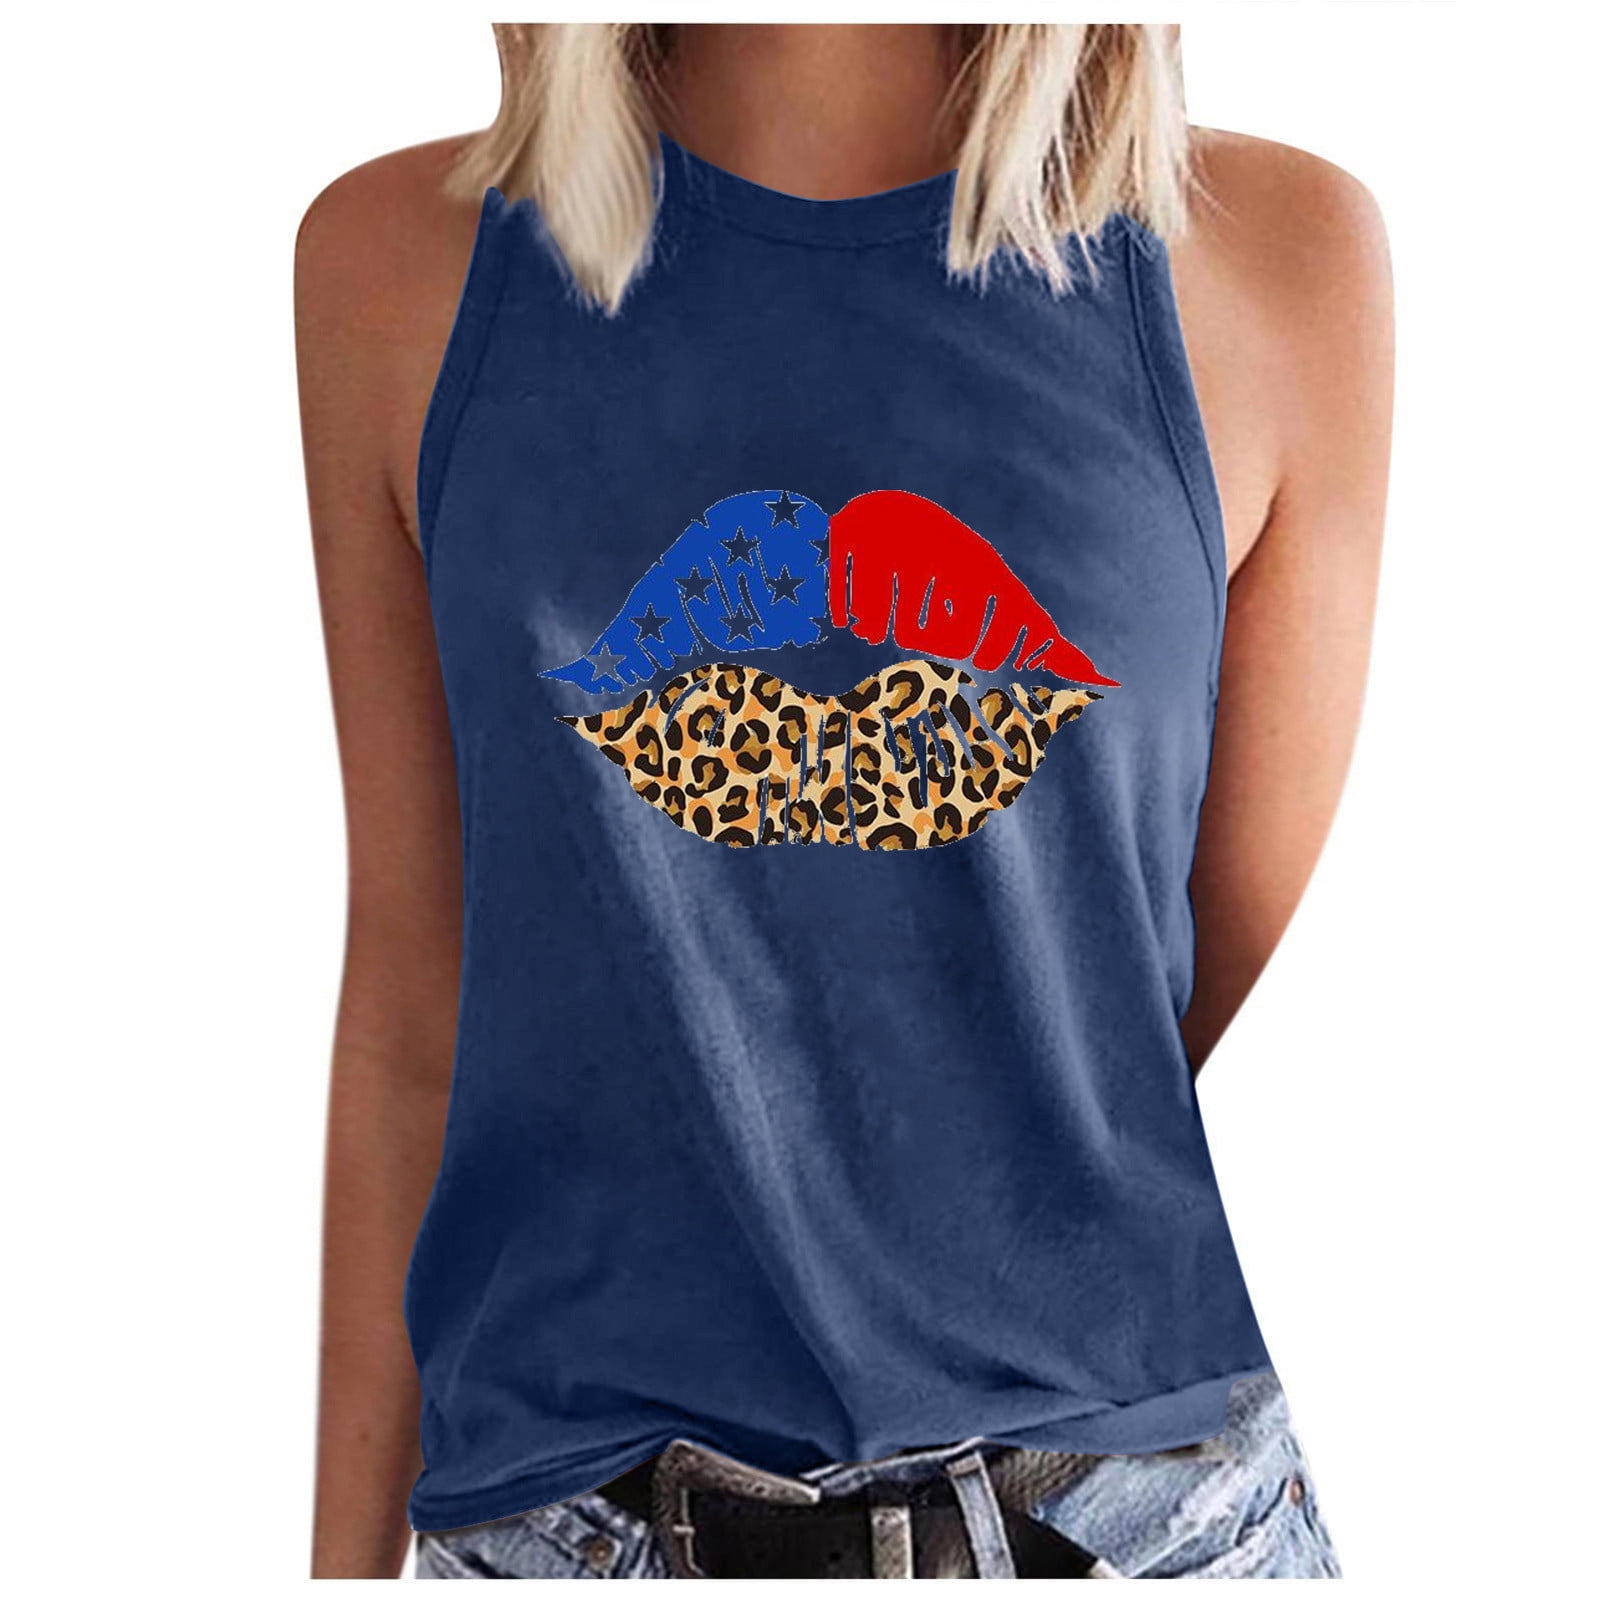 Women 4th of July Tops, Women's Sleeveless Summer Sexy Casual Tops